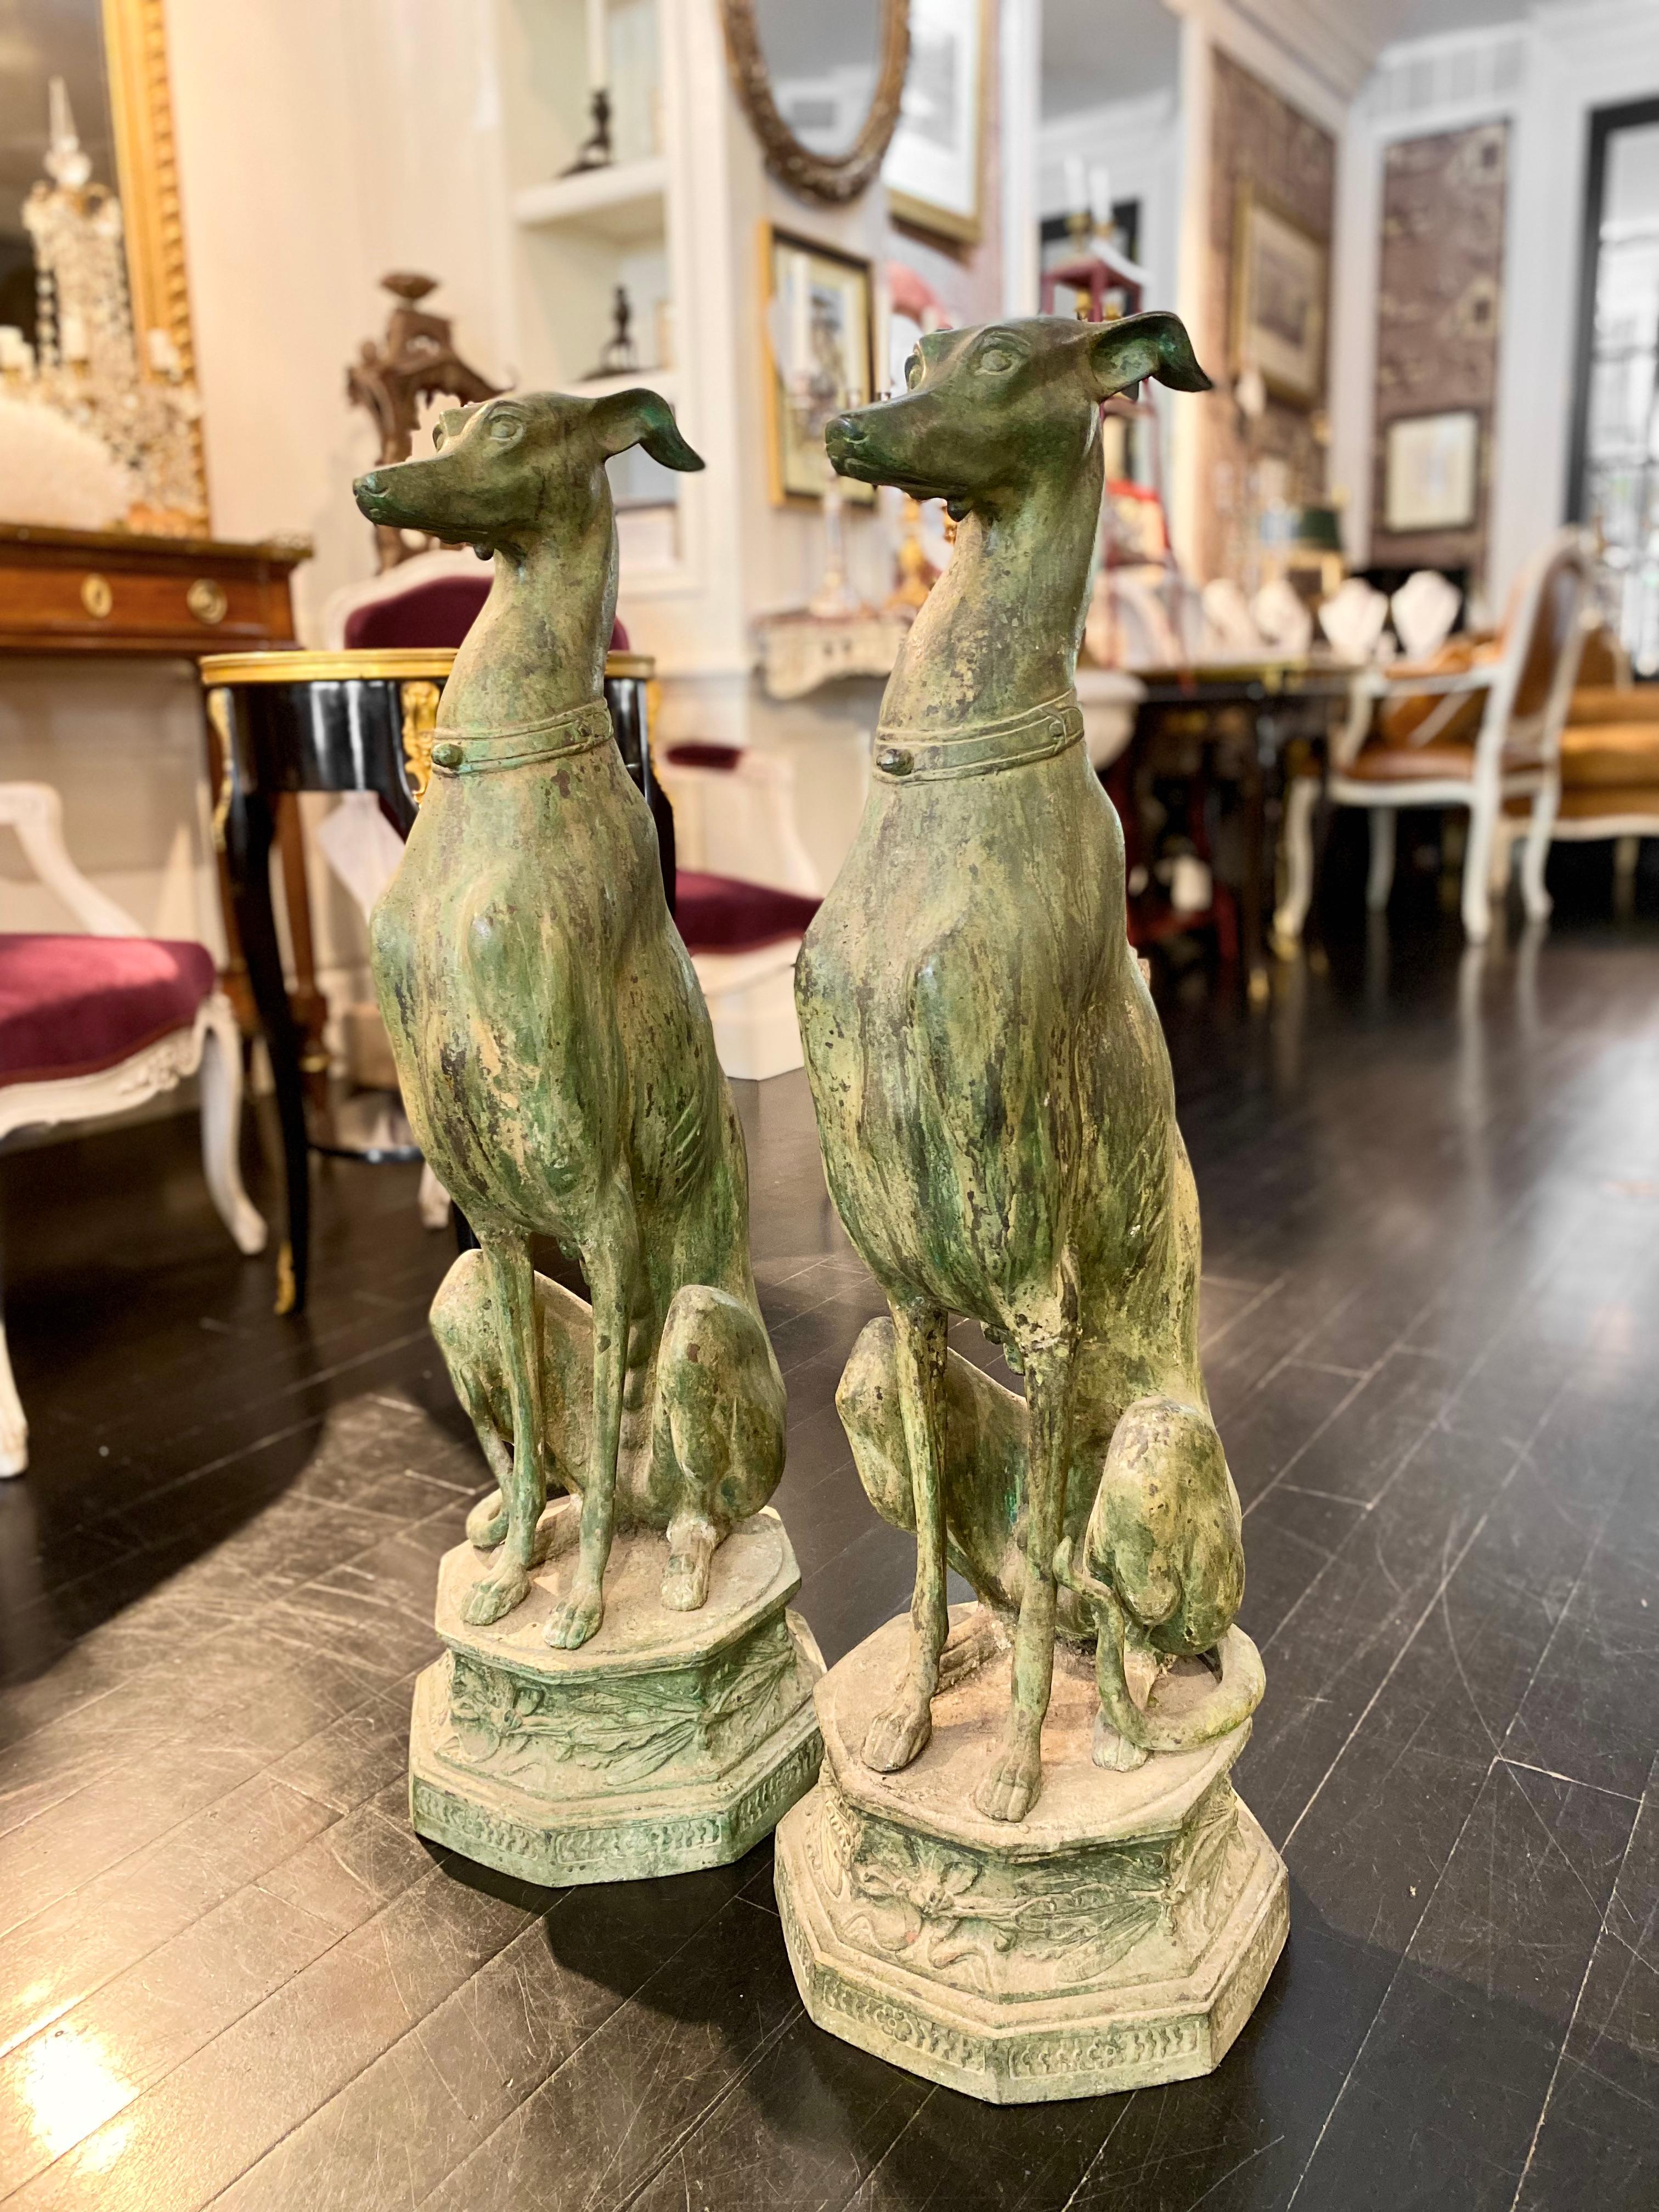 A large pair of French bronze greyhounds, verdigris patina, beautiful models, mounted upon octogonal bronze bases decorated in leaves. Mid-Century Modern chic, they would blend seamlessly in a Hollywood Regency décor.